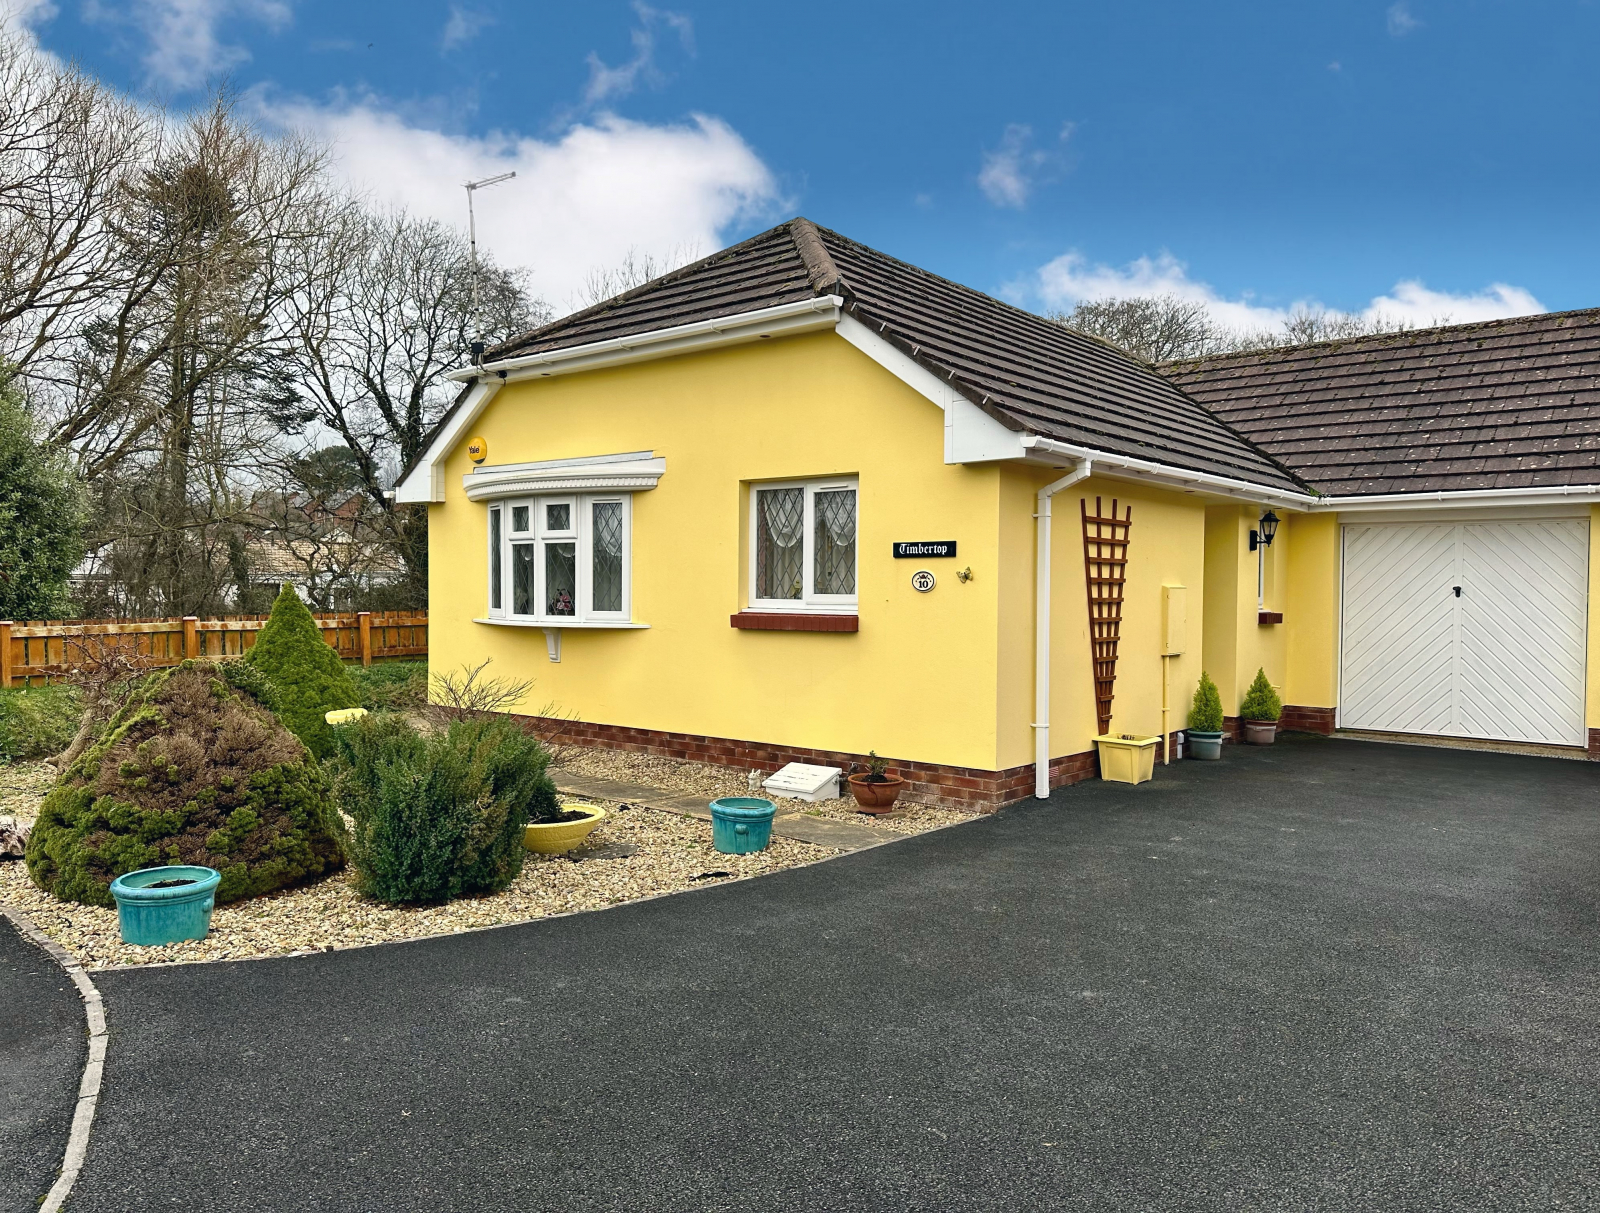 2 bed semi-detached house for sale in Roundswell, Devon  - Property Image 1